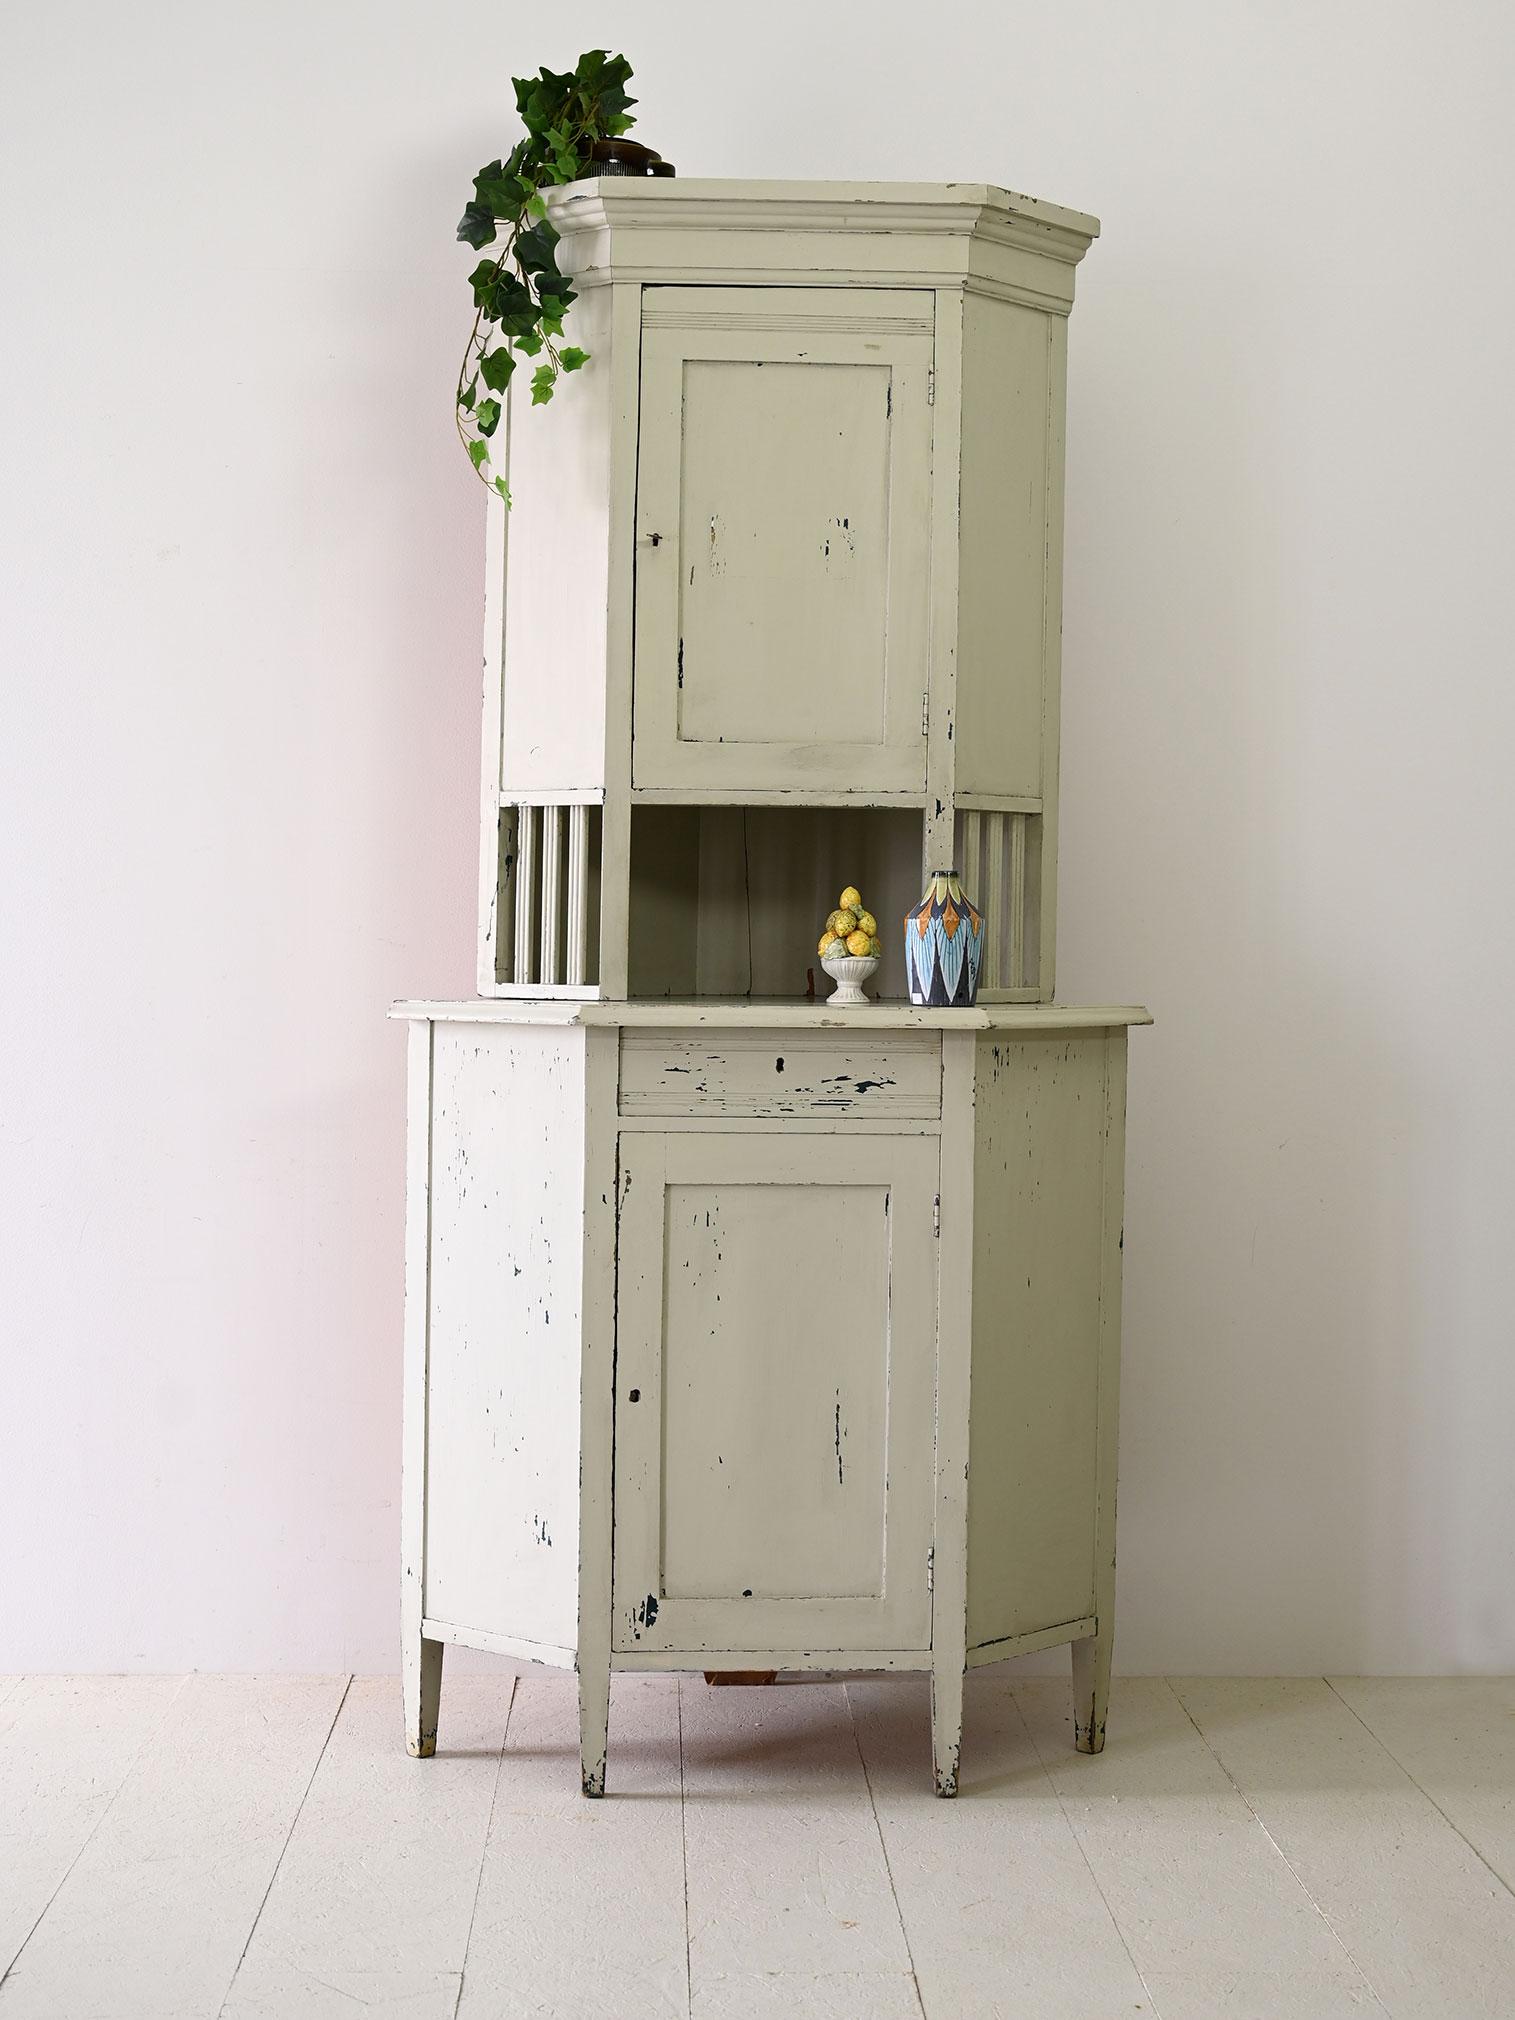 Vintage Scandinavian furniture.
 
This charming corner piece, inspired by the Nordic Scandinavian style, is made of wood painted white in the 1930s/40s.

Its structure consists of an upper and lower hinged door, both equipped with lock. In the